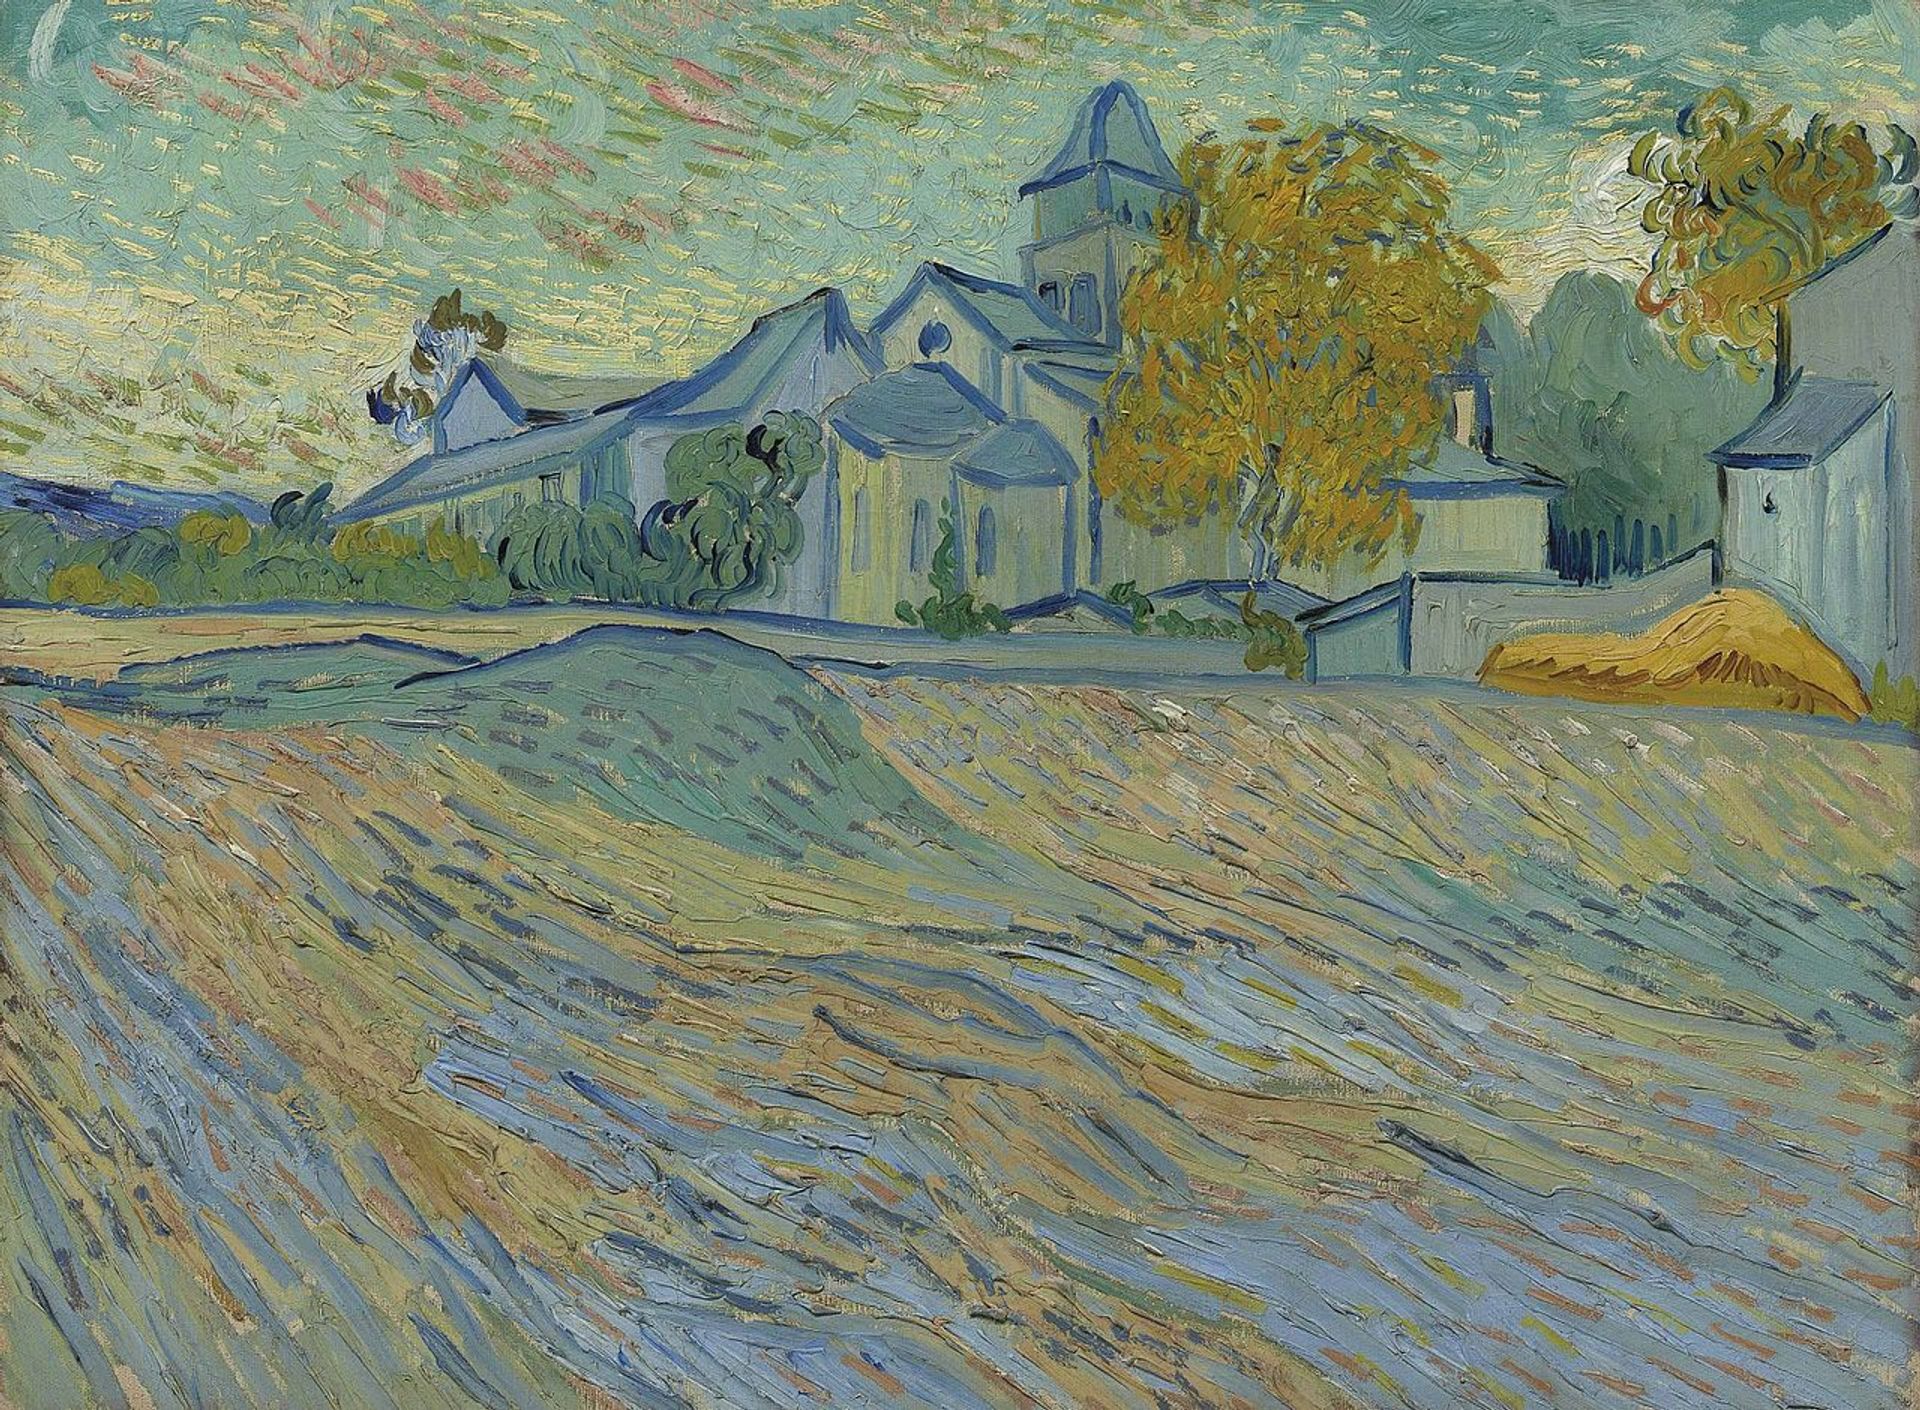 the celebrities who’ve owned Vincent’s work